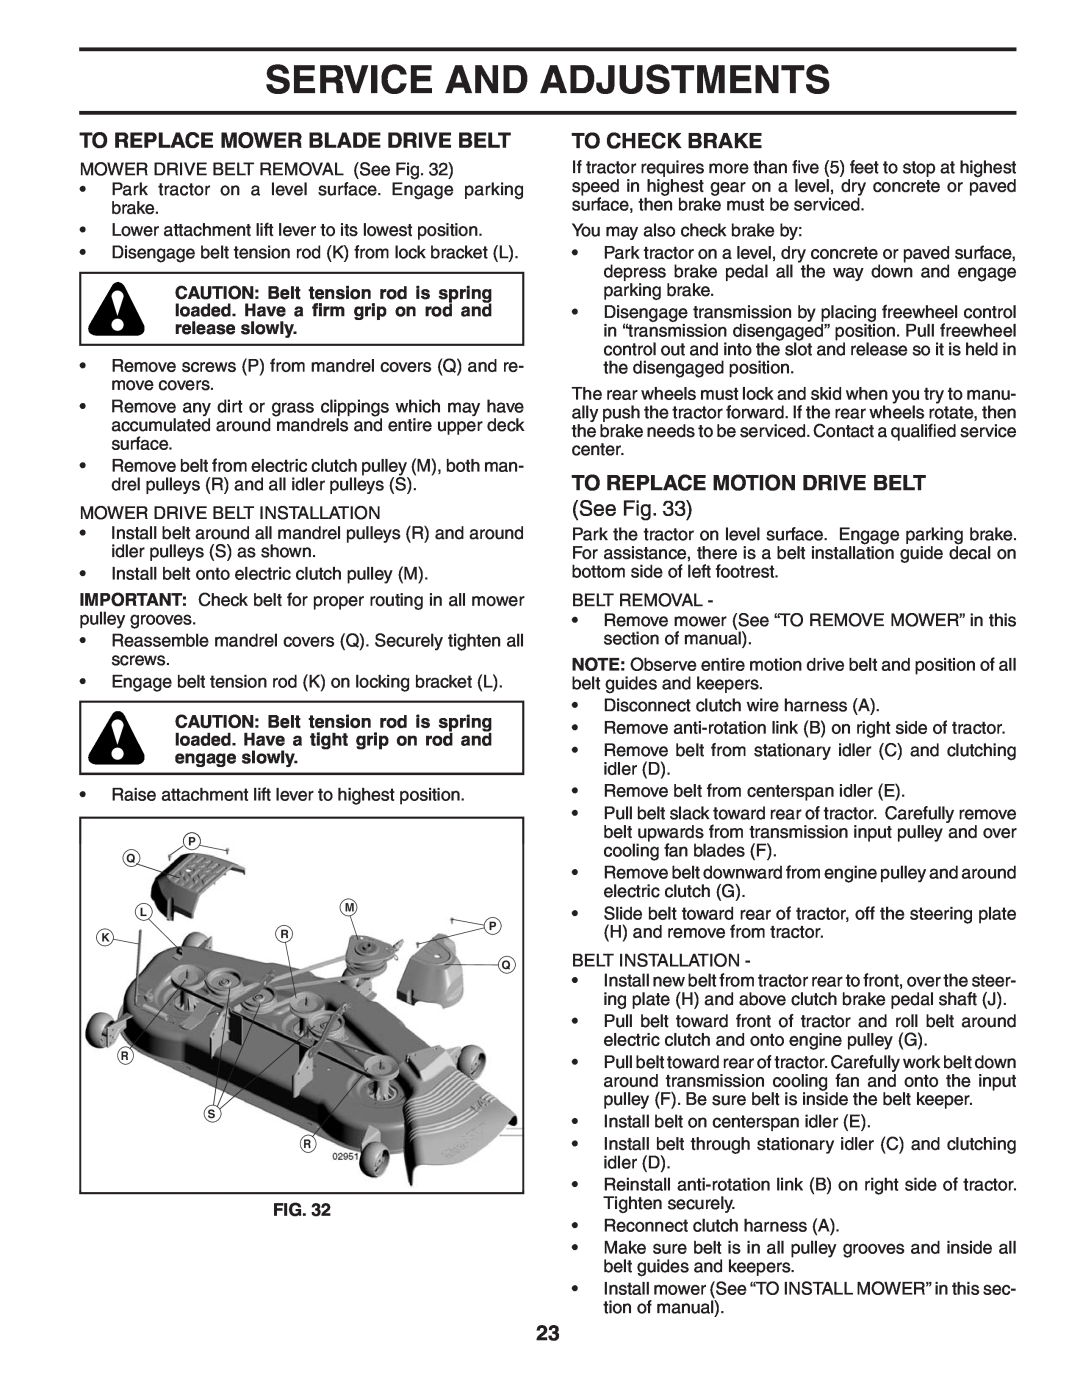 Husqvarna YTH2454T owner manual To Replace Mower Blade Drive Belt, To Check Brake, To Replace Motion Drive Belt, See Fig 